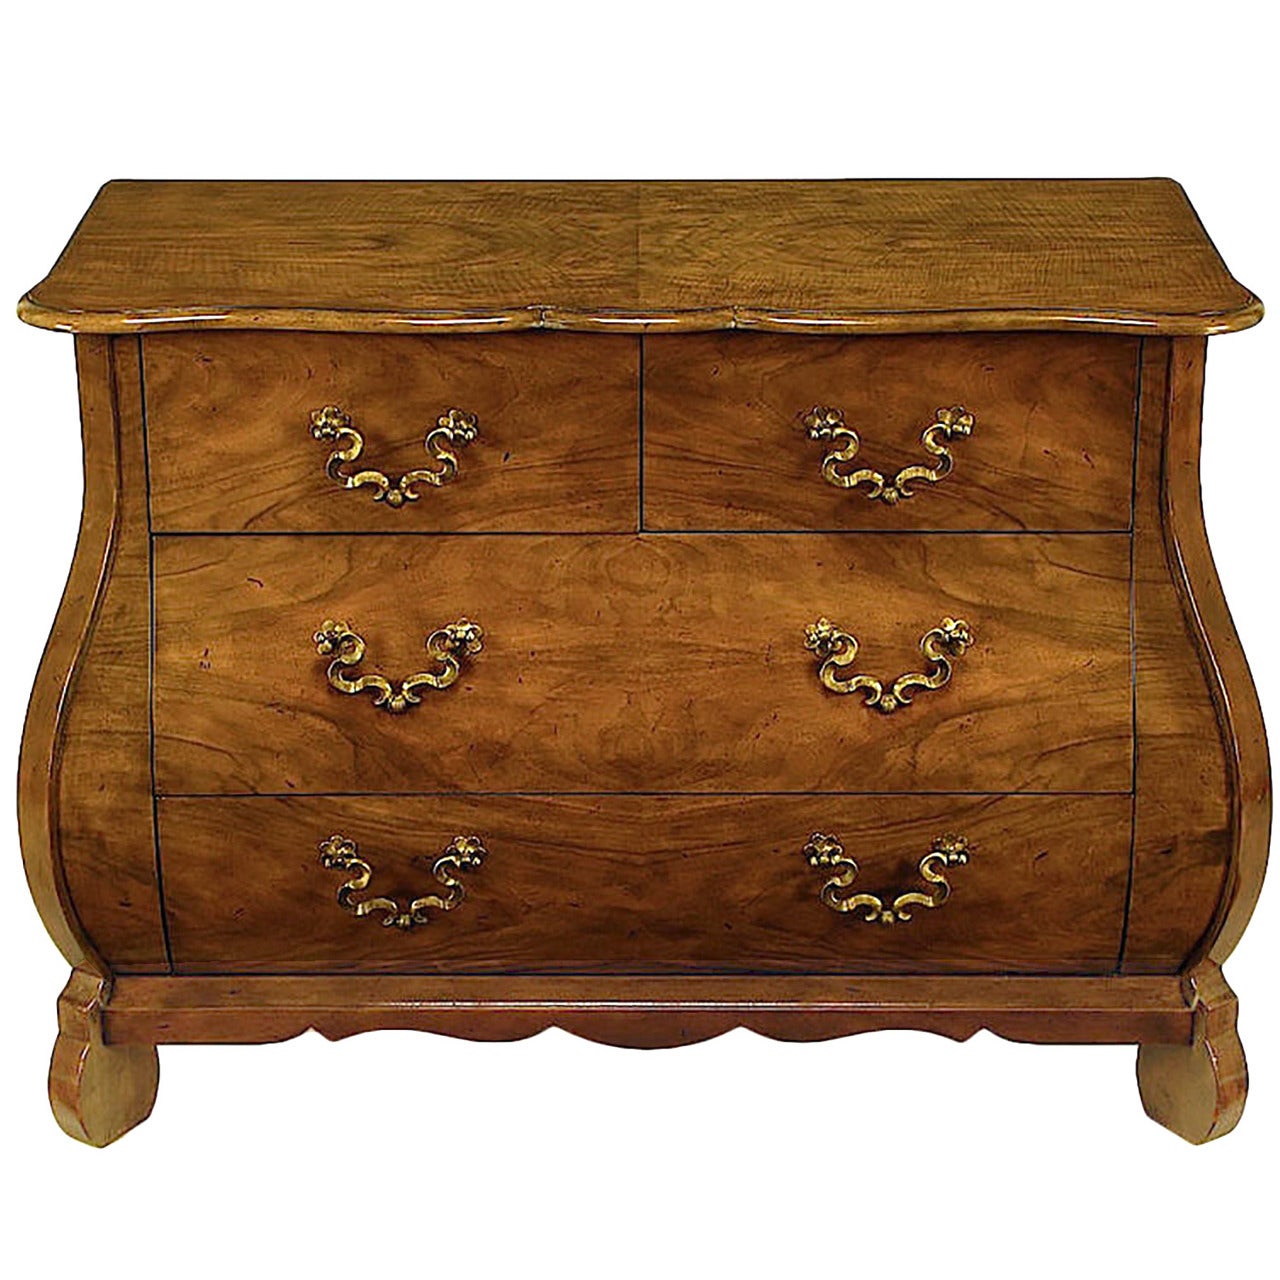 Baker "Collectors Edition" Figured Walnut Bombe Three-Drawer Commode For Sale